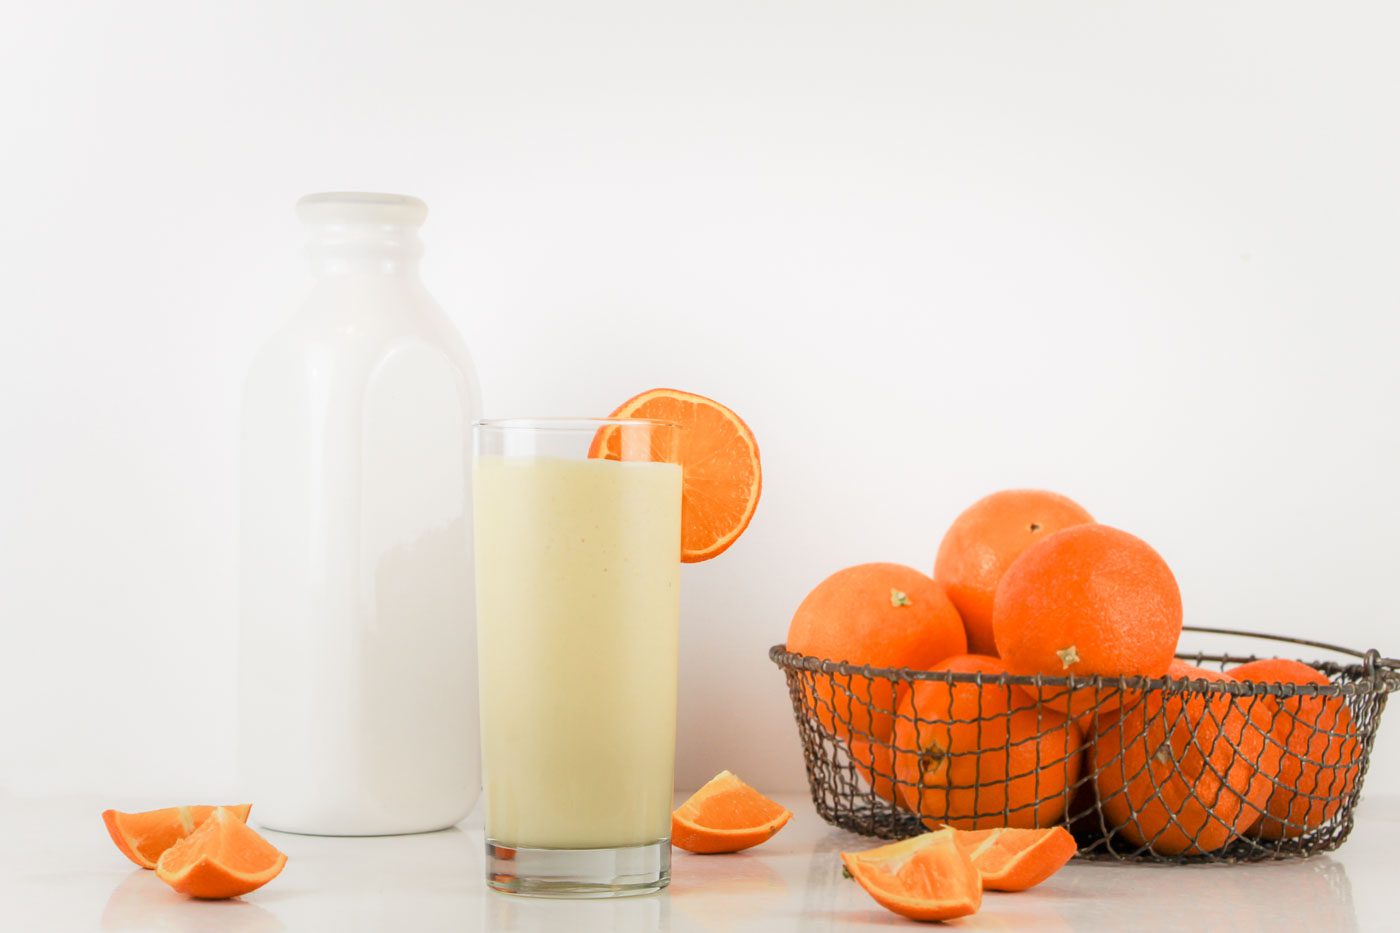 on a table sits a jug of milk, a basket of orange and a glass of kefir smoothie